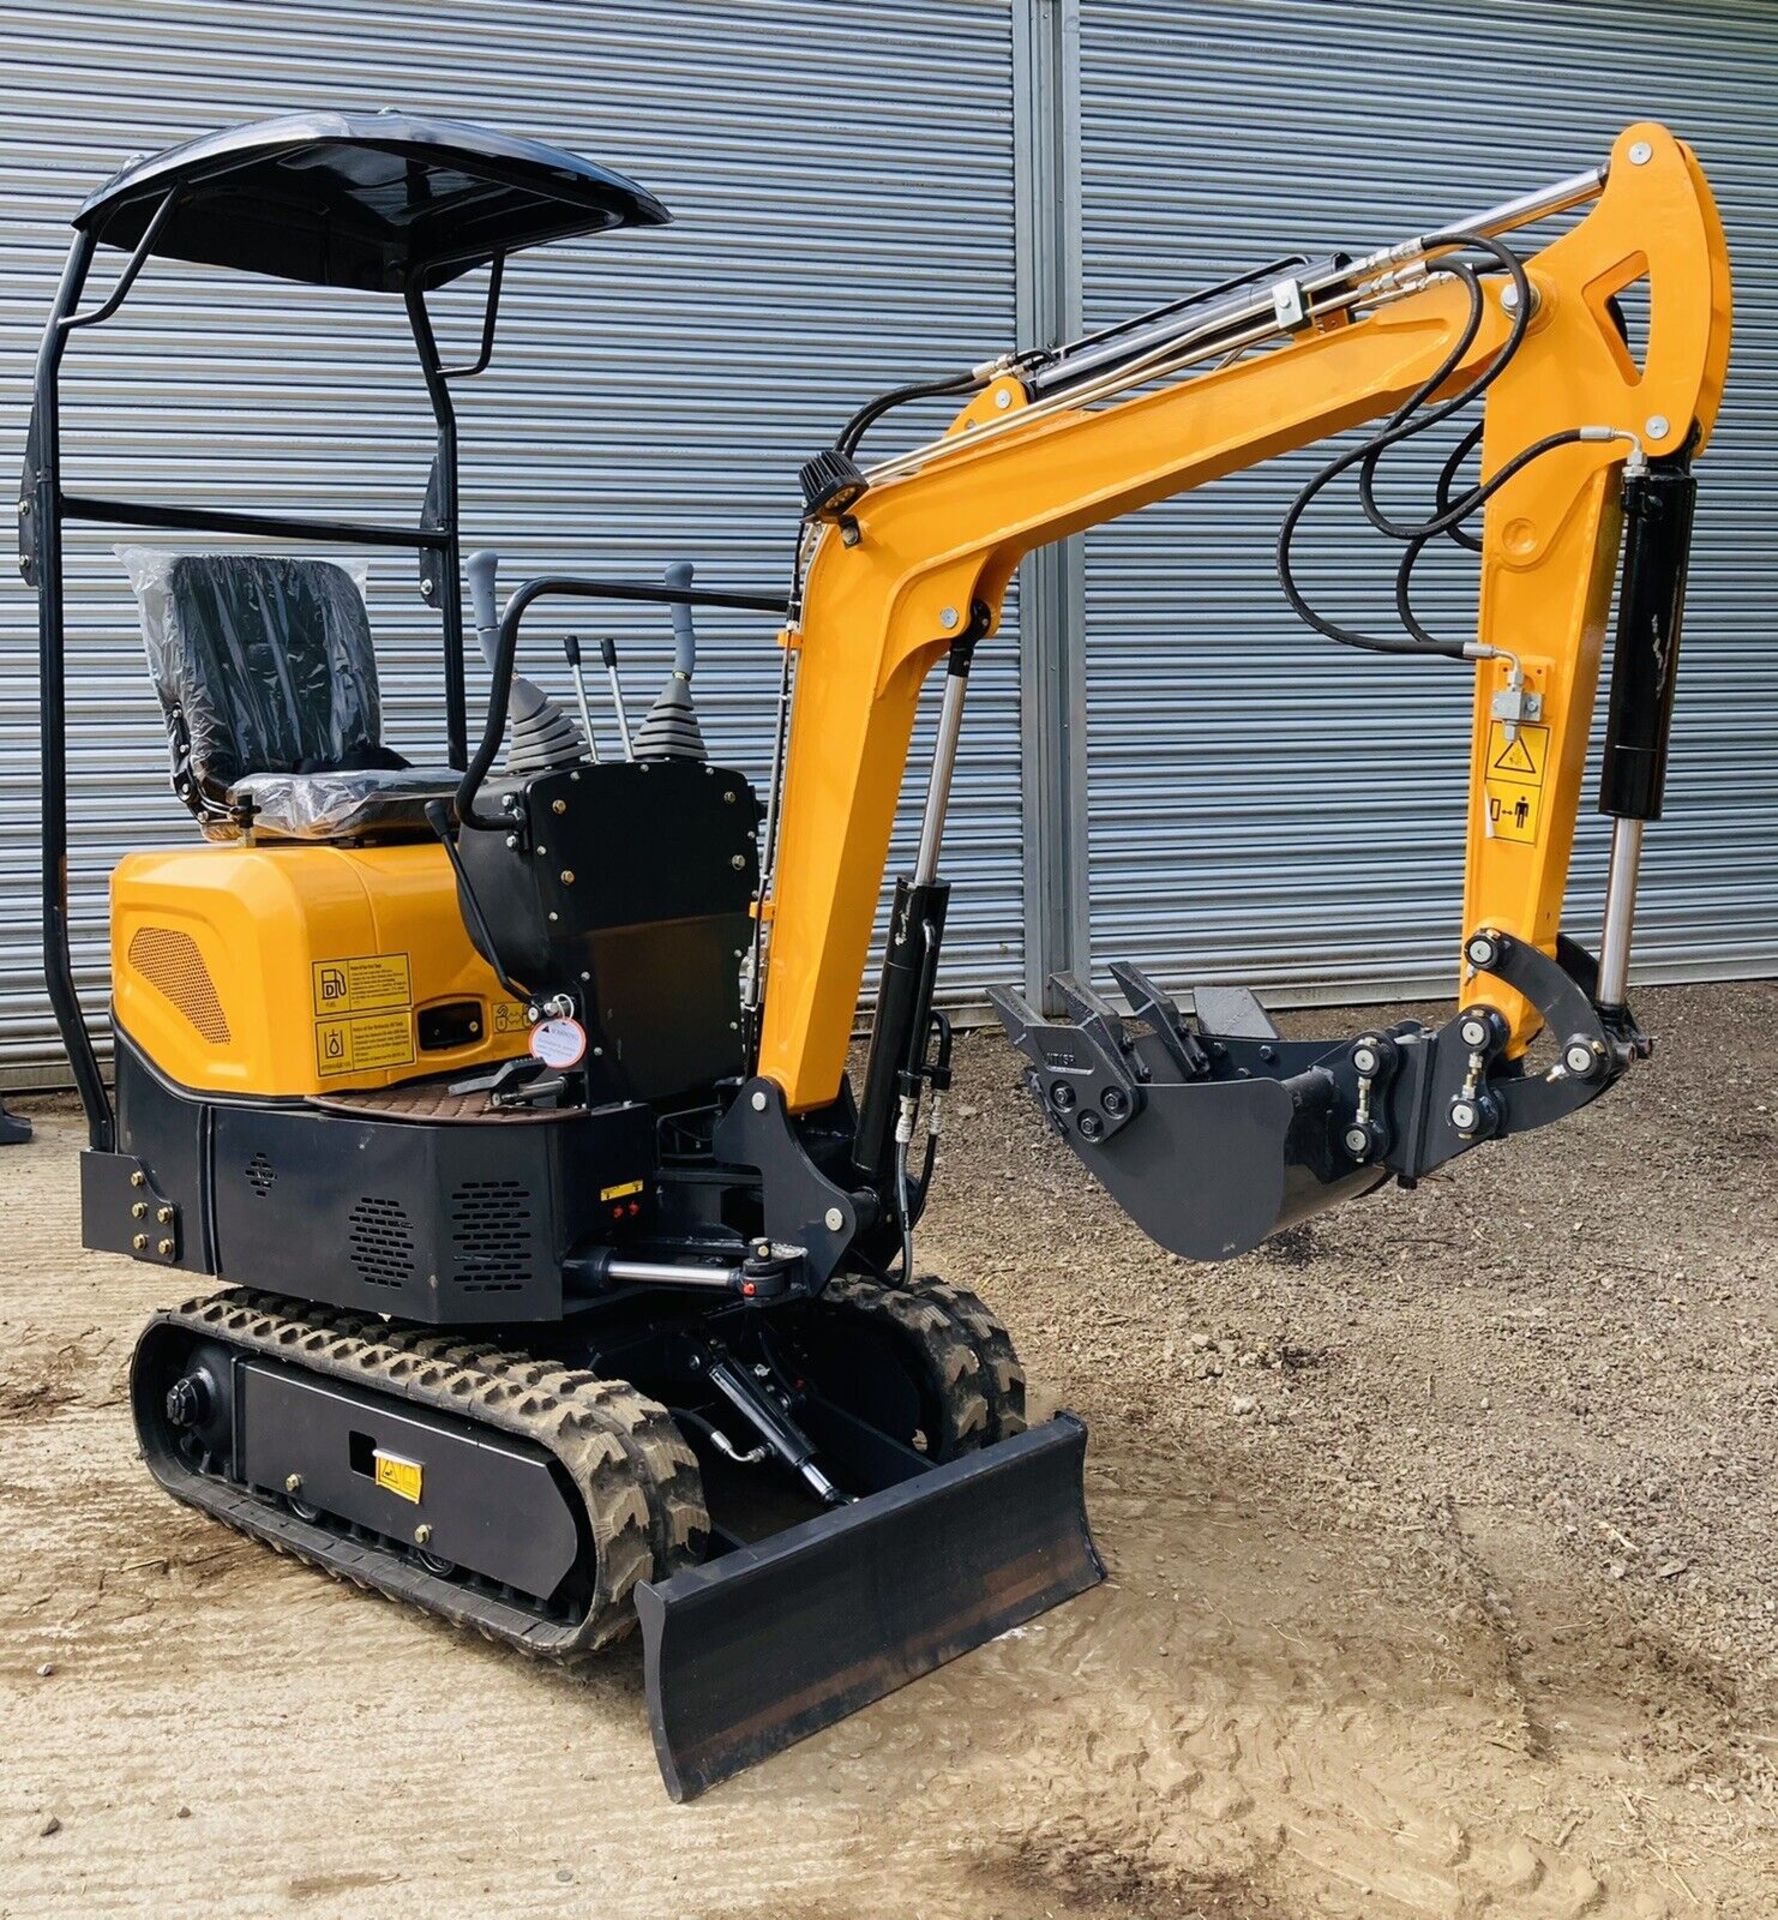 2023 POWER UNLEASHED: BRAND NEW 1 TONNE MICRO DIGGER - JCB, KUBOTA, AND MORE! - Image 12 of 12